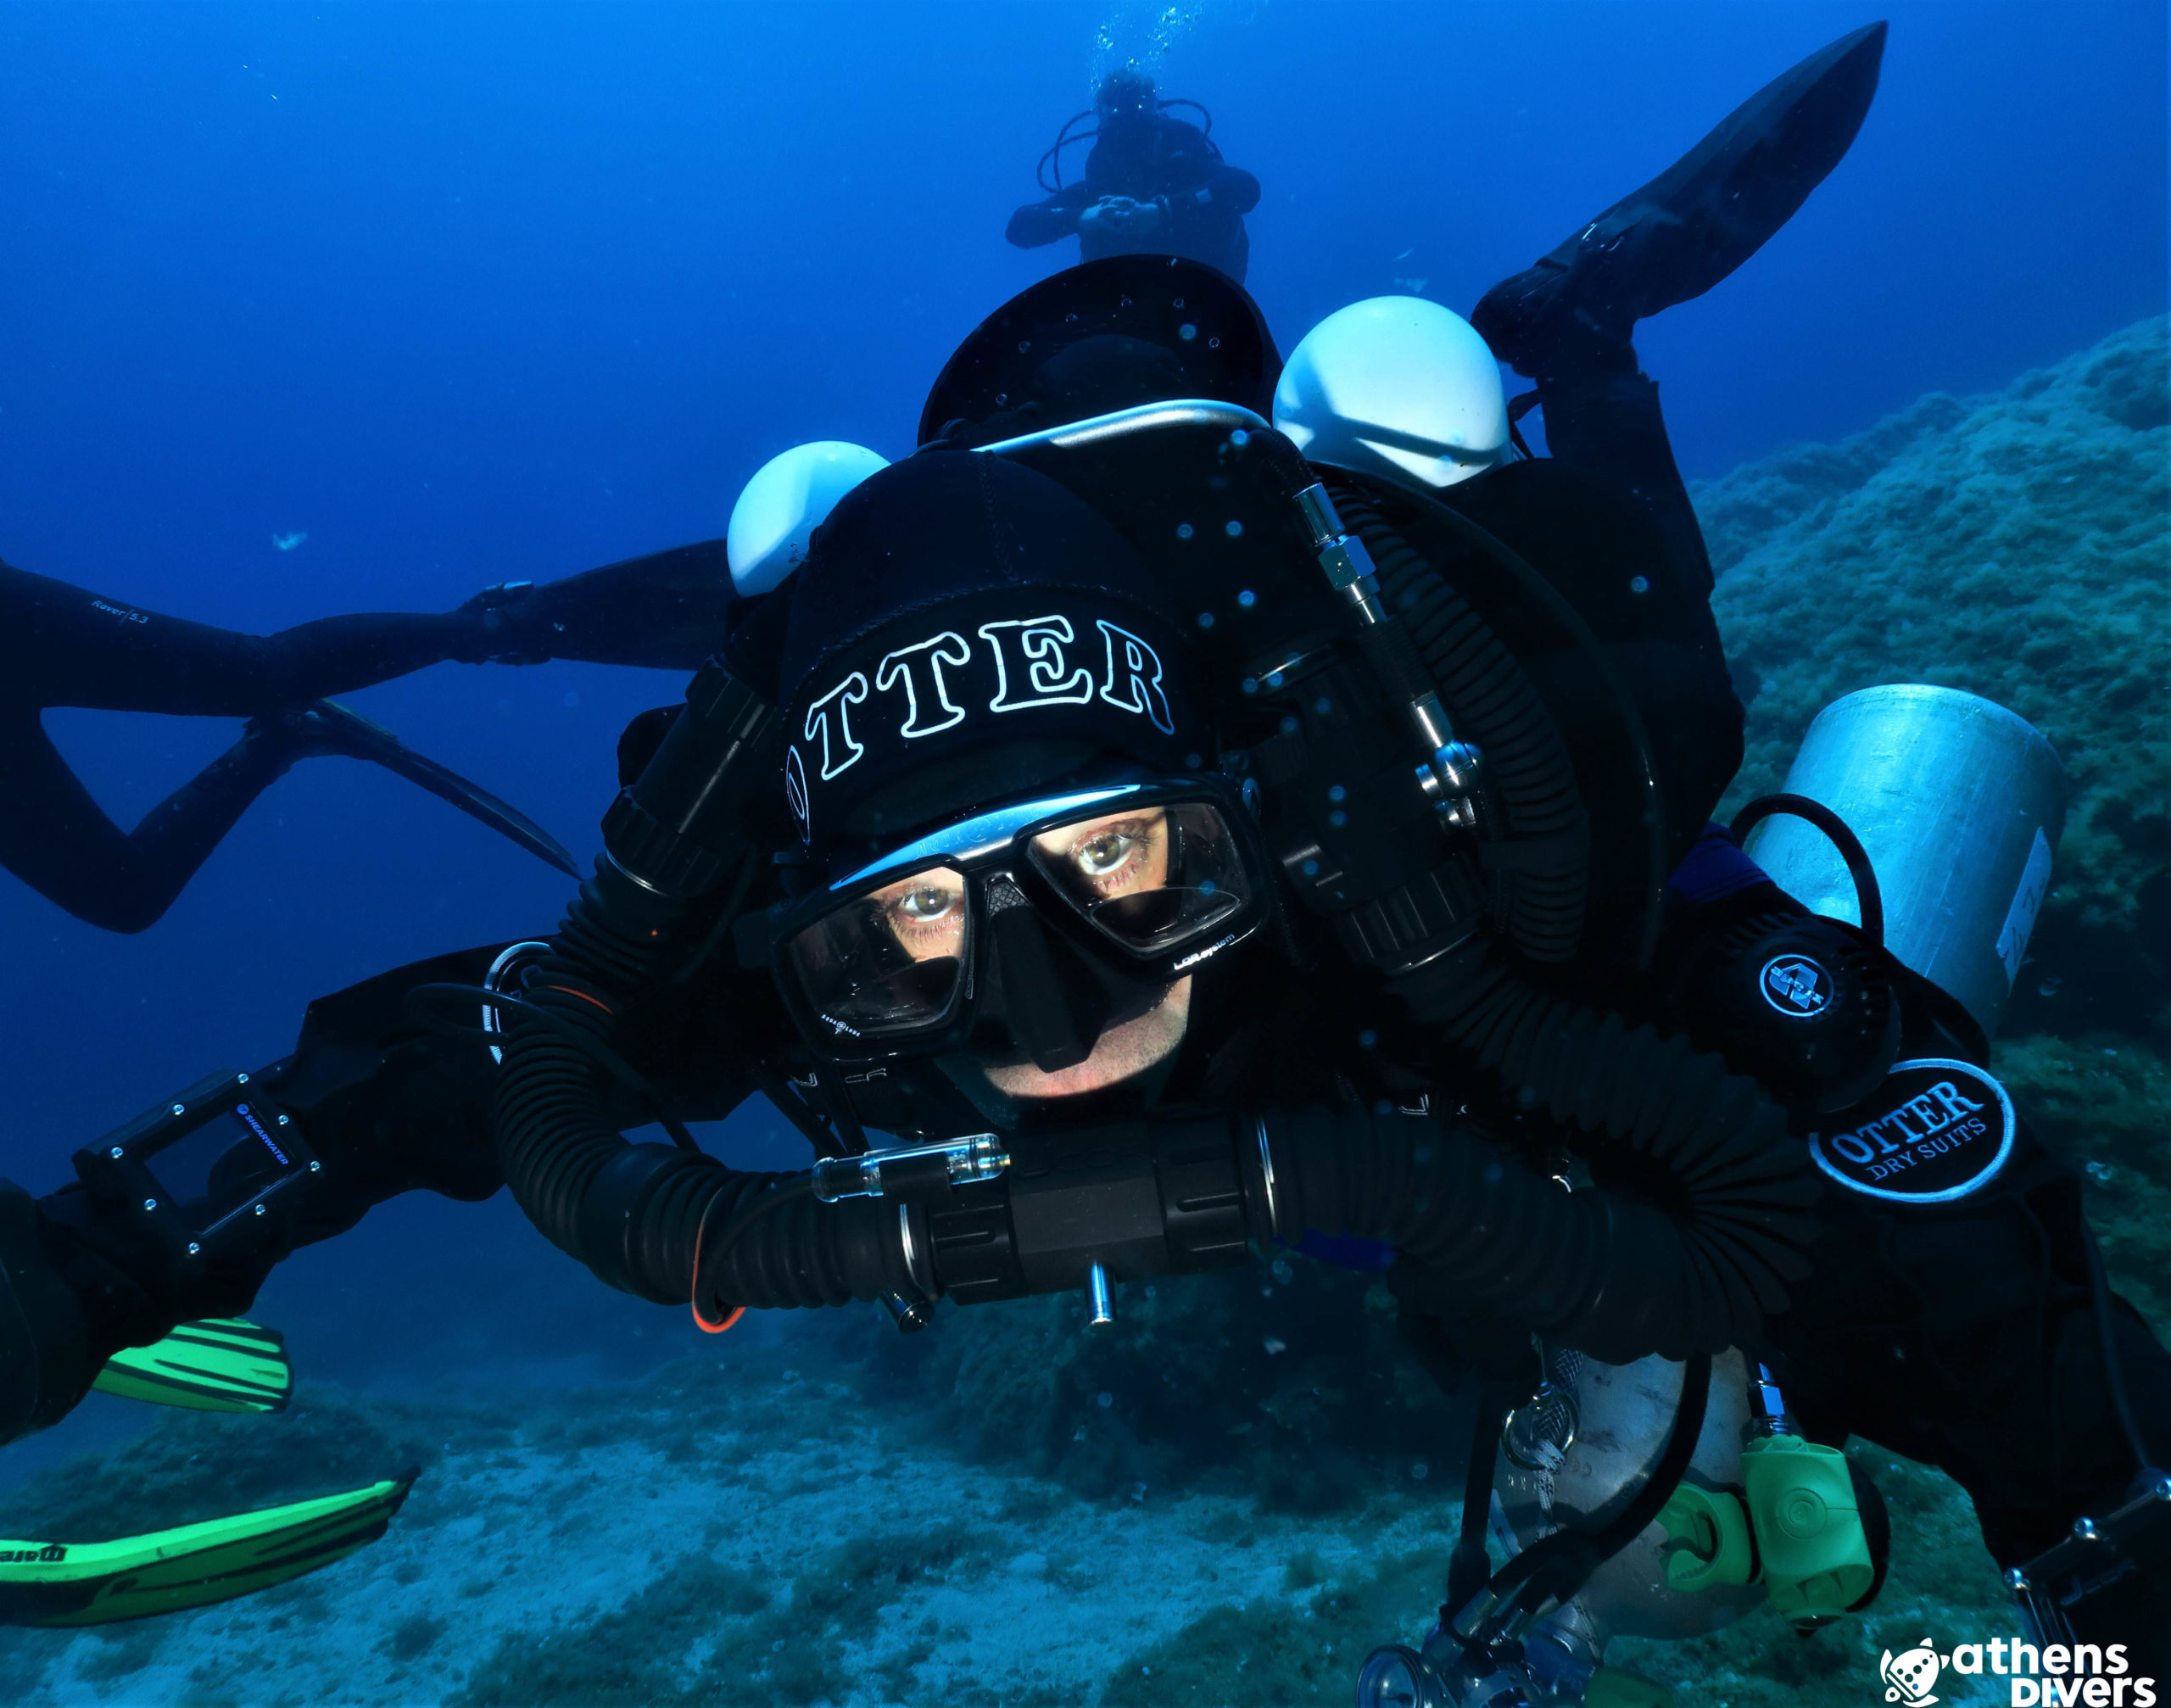 rebreather diver hovering close by